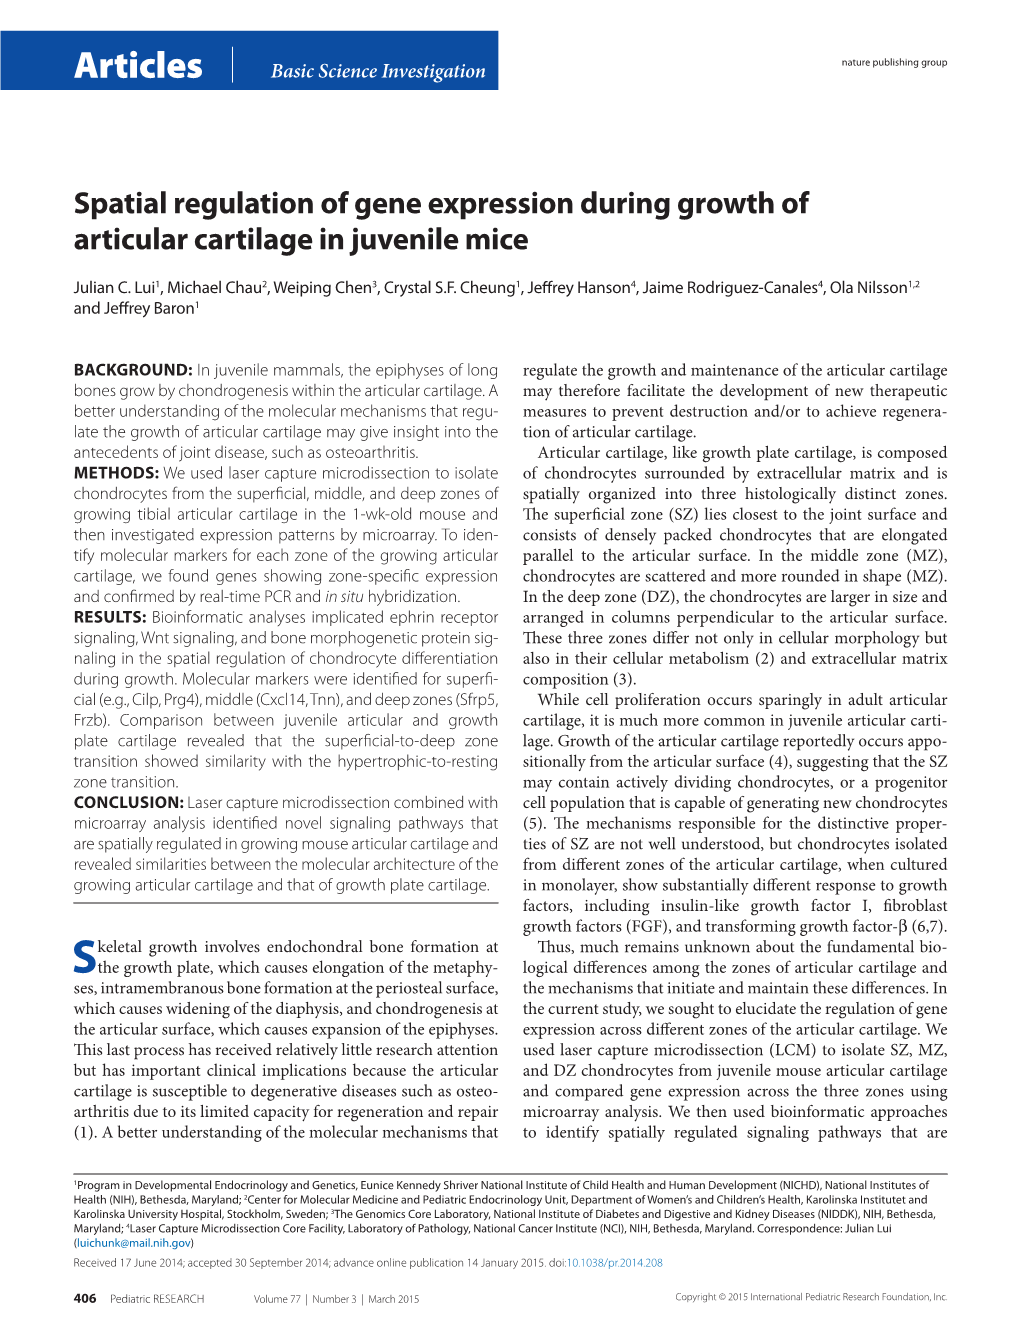 Spatial Regulation of Gene Expression During Growth of Articular Cartilage in Juvenile Mice